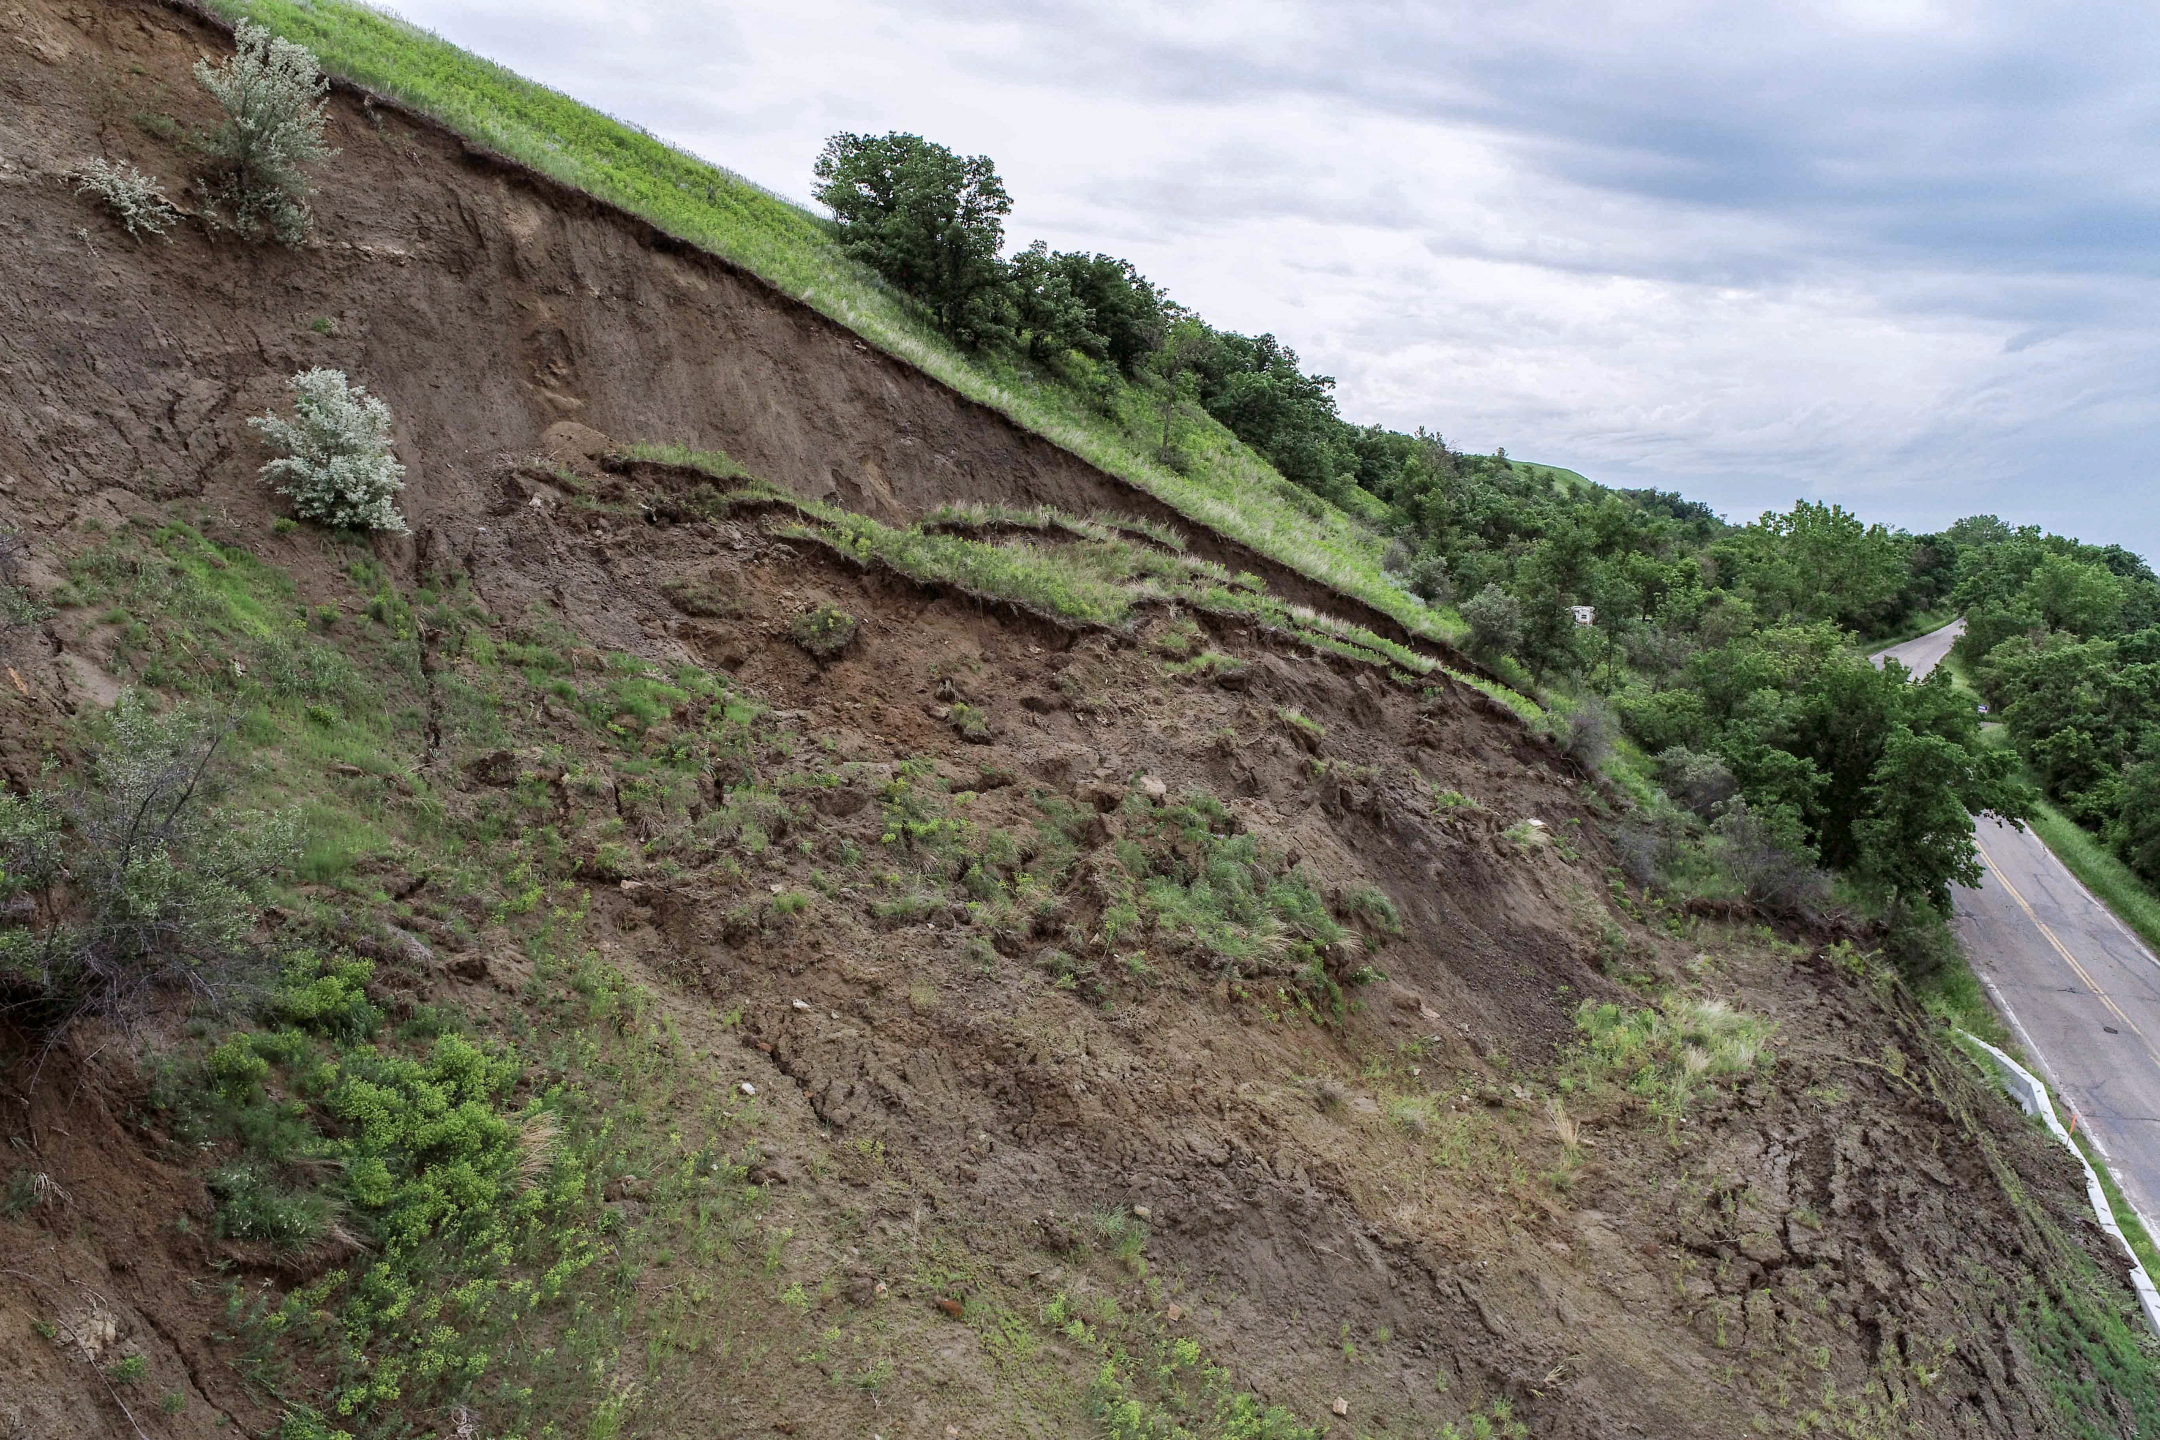 Photograph of a landslide along a paved road.